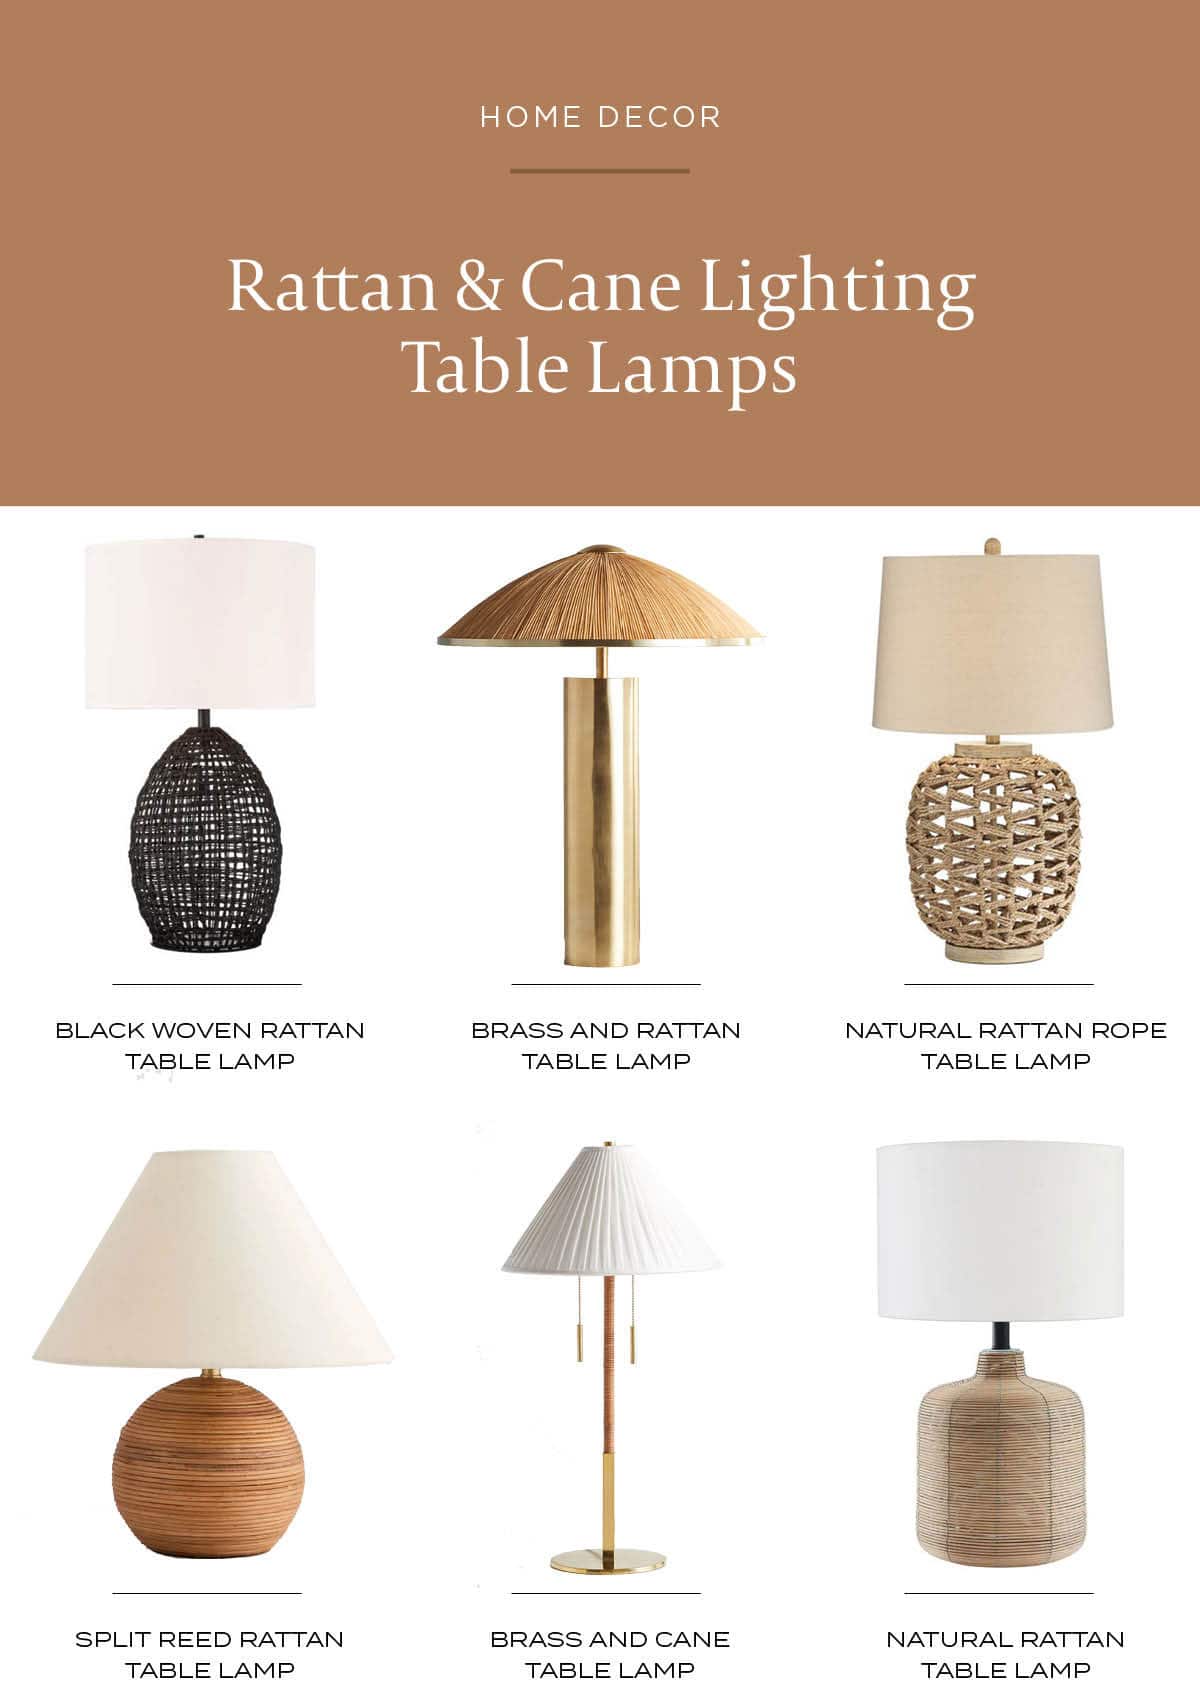 Rattan Lighting - rattan table lamps and lampshades